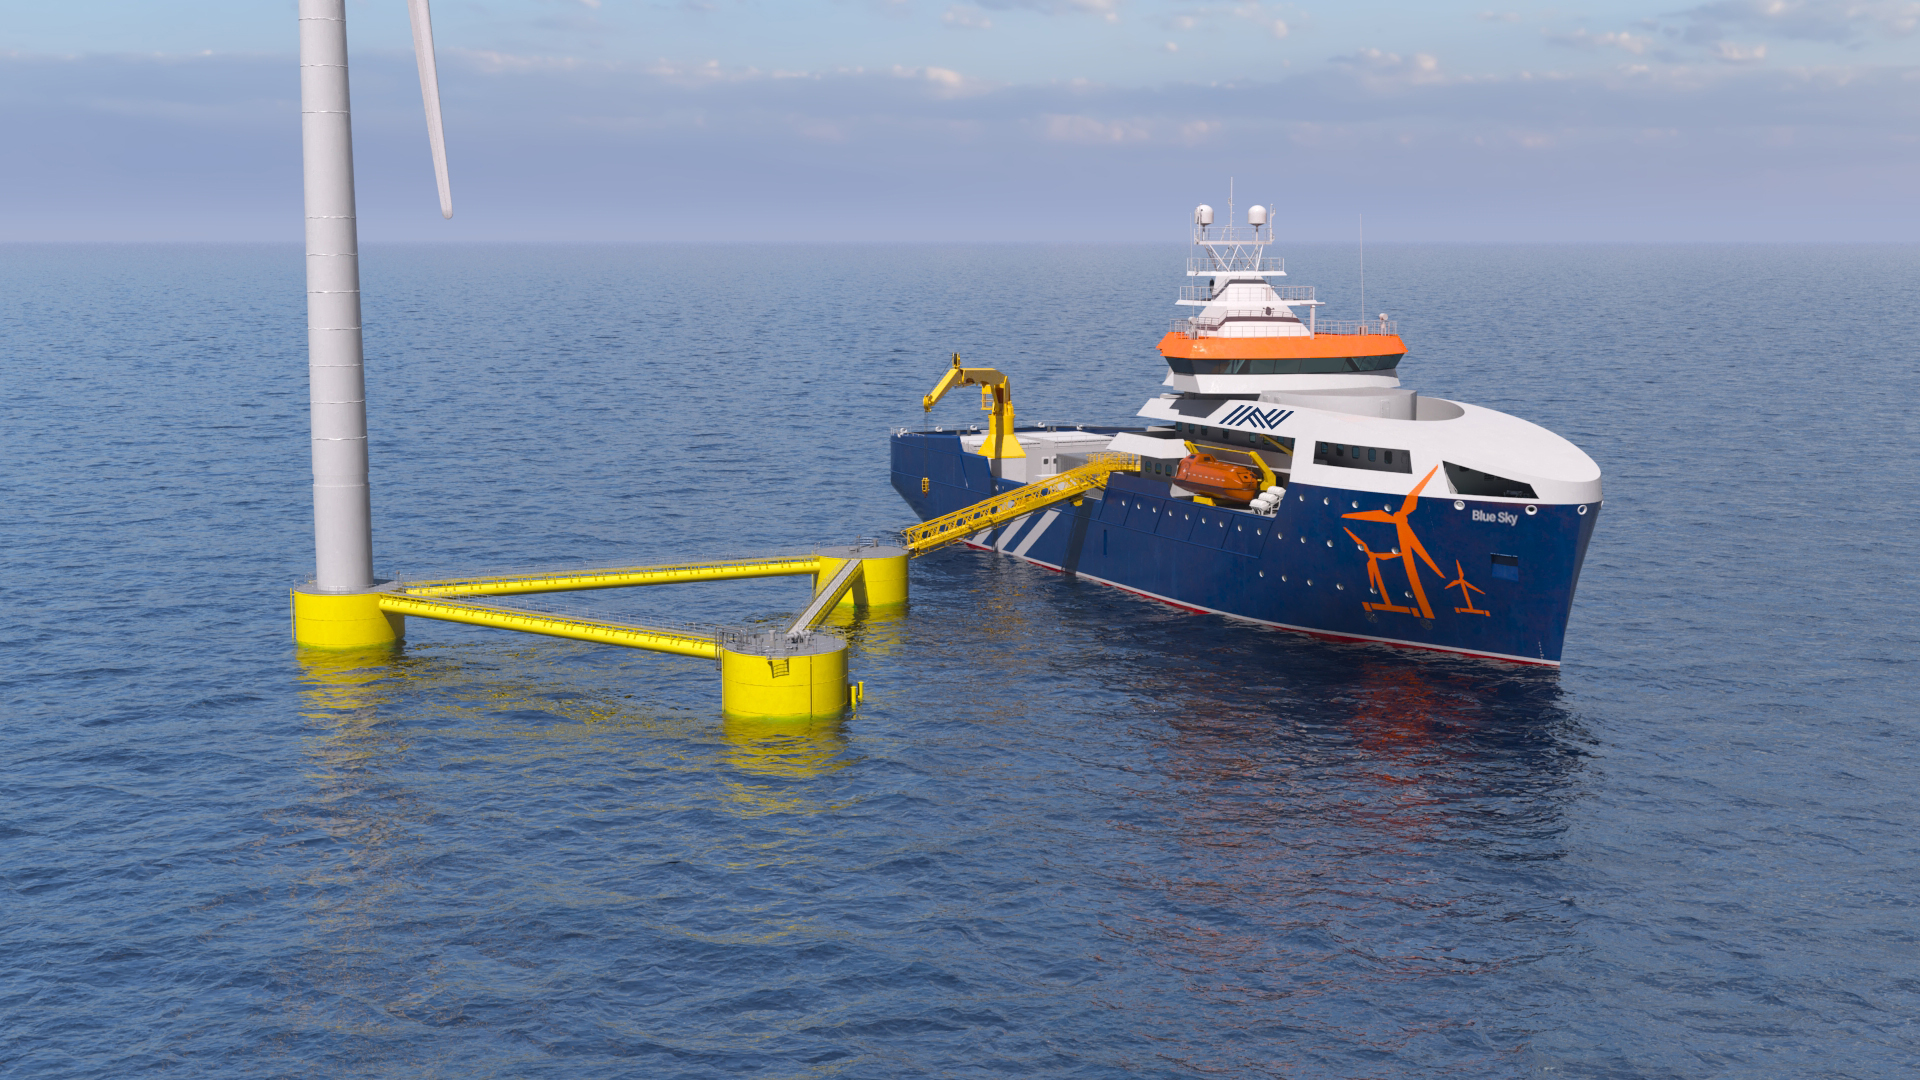 Introducing Blue Sky, Saltwater’s solution for the growing offshore wind